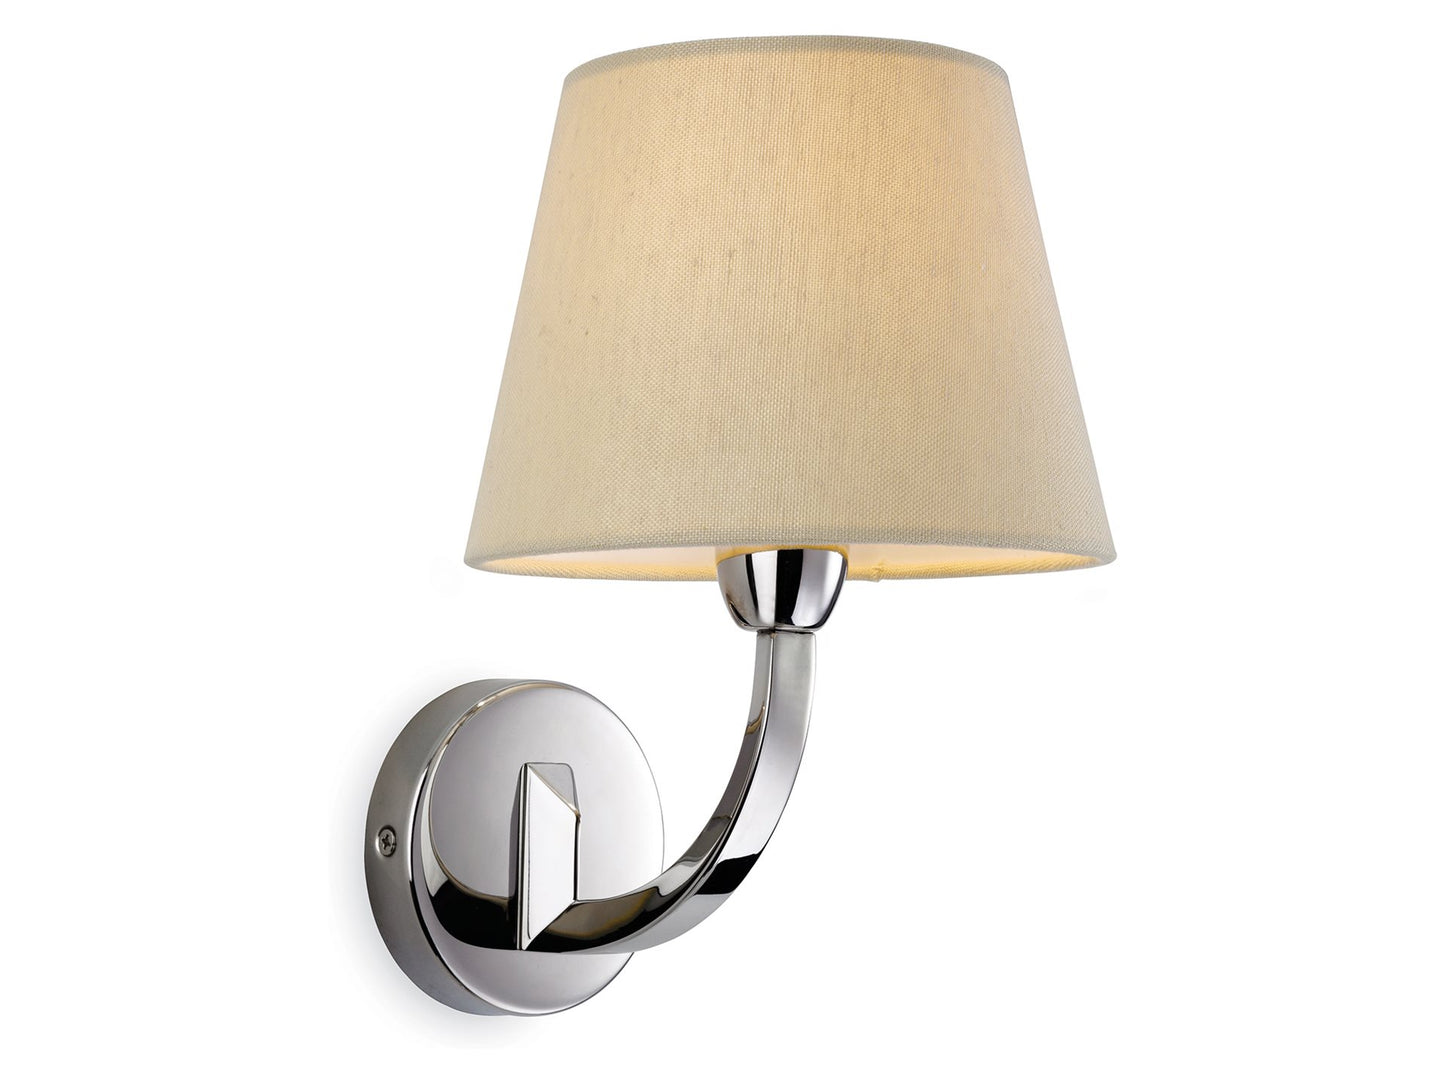 Fairmont Single WallPolished Stainless Steel with Cream Linen Shade